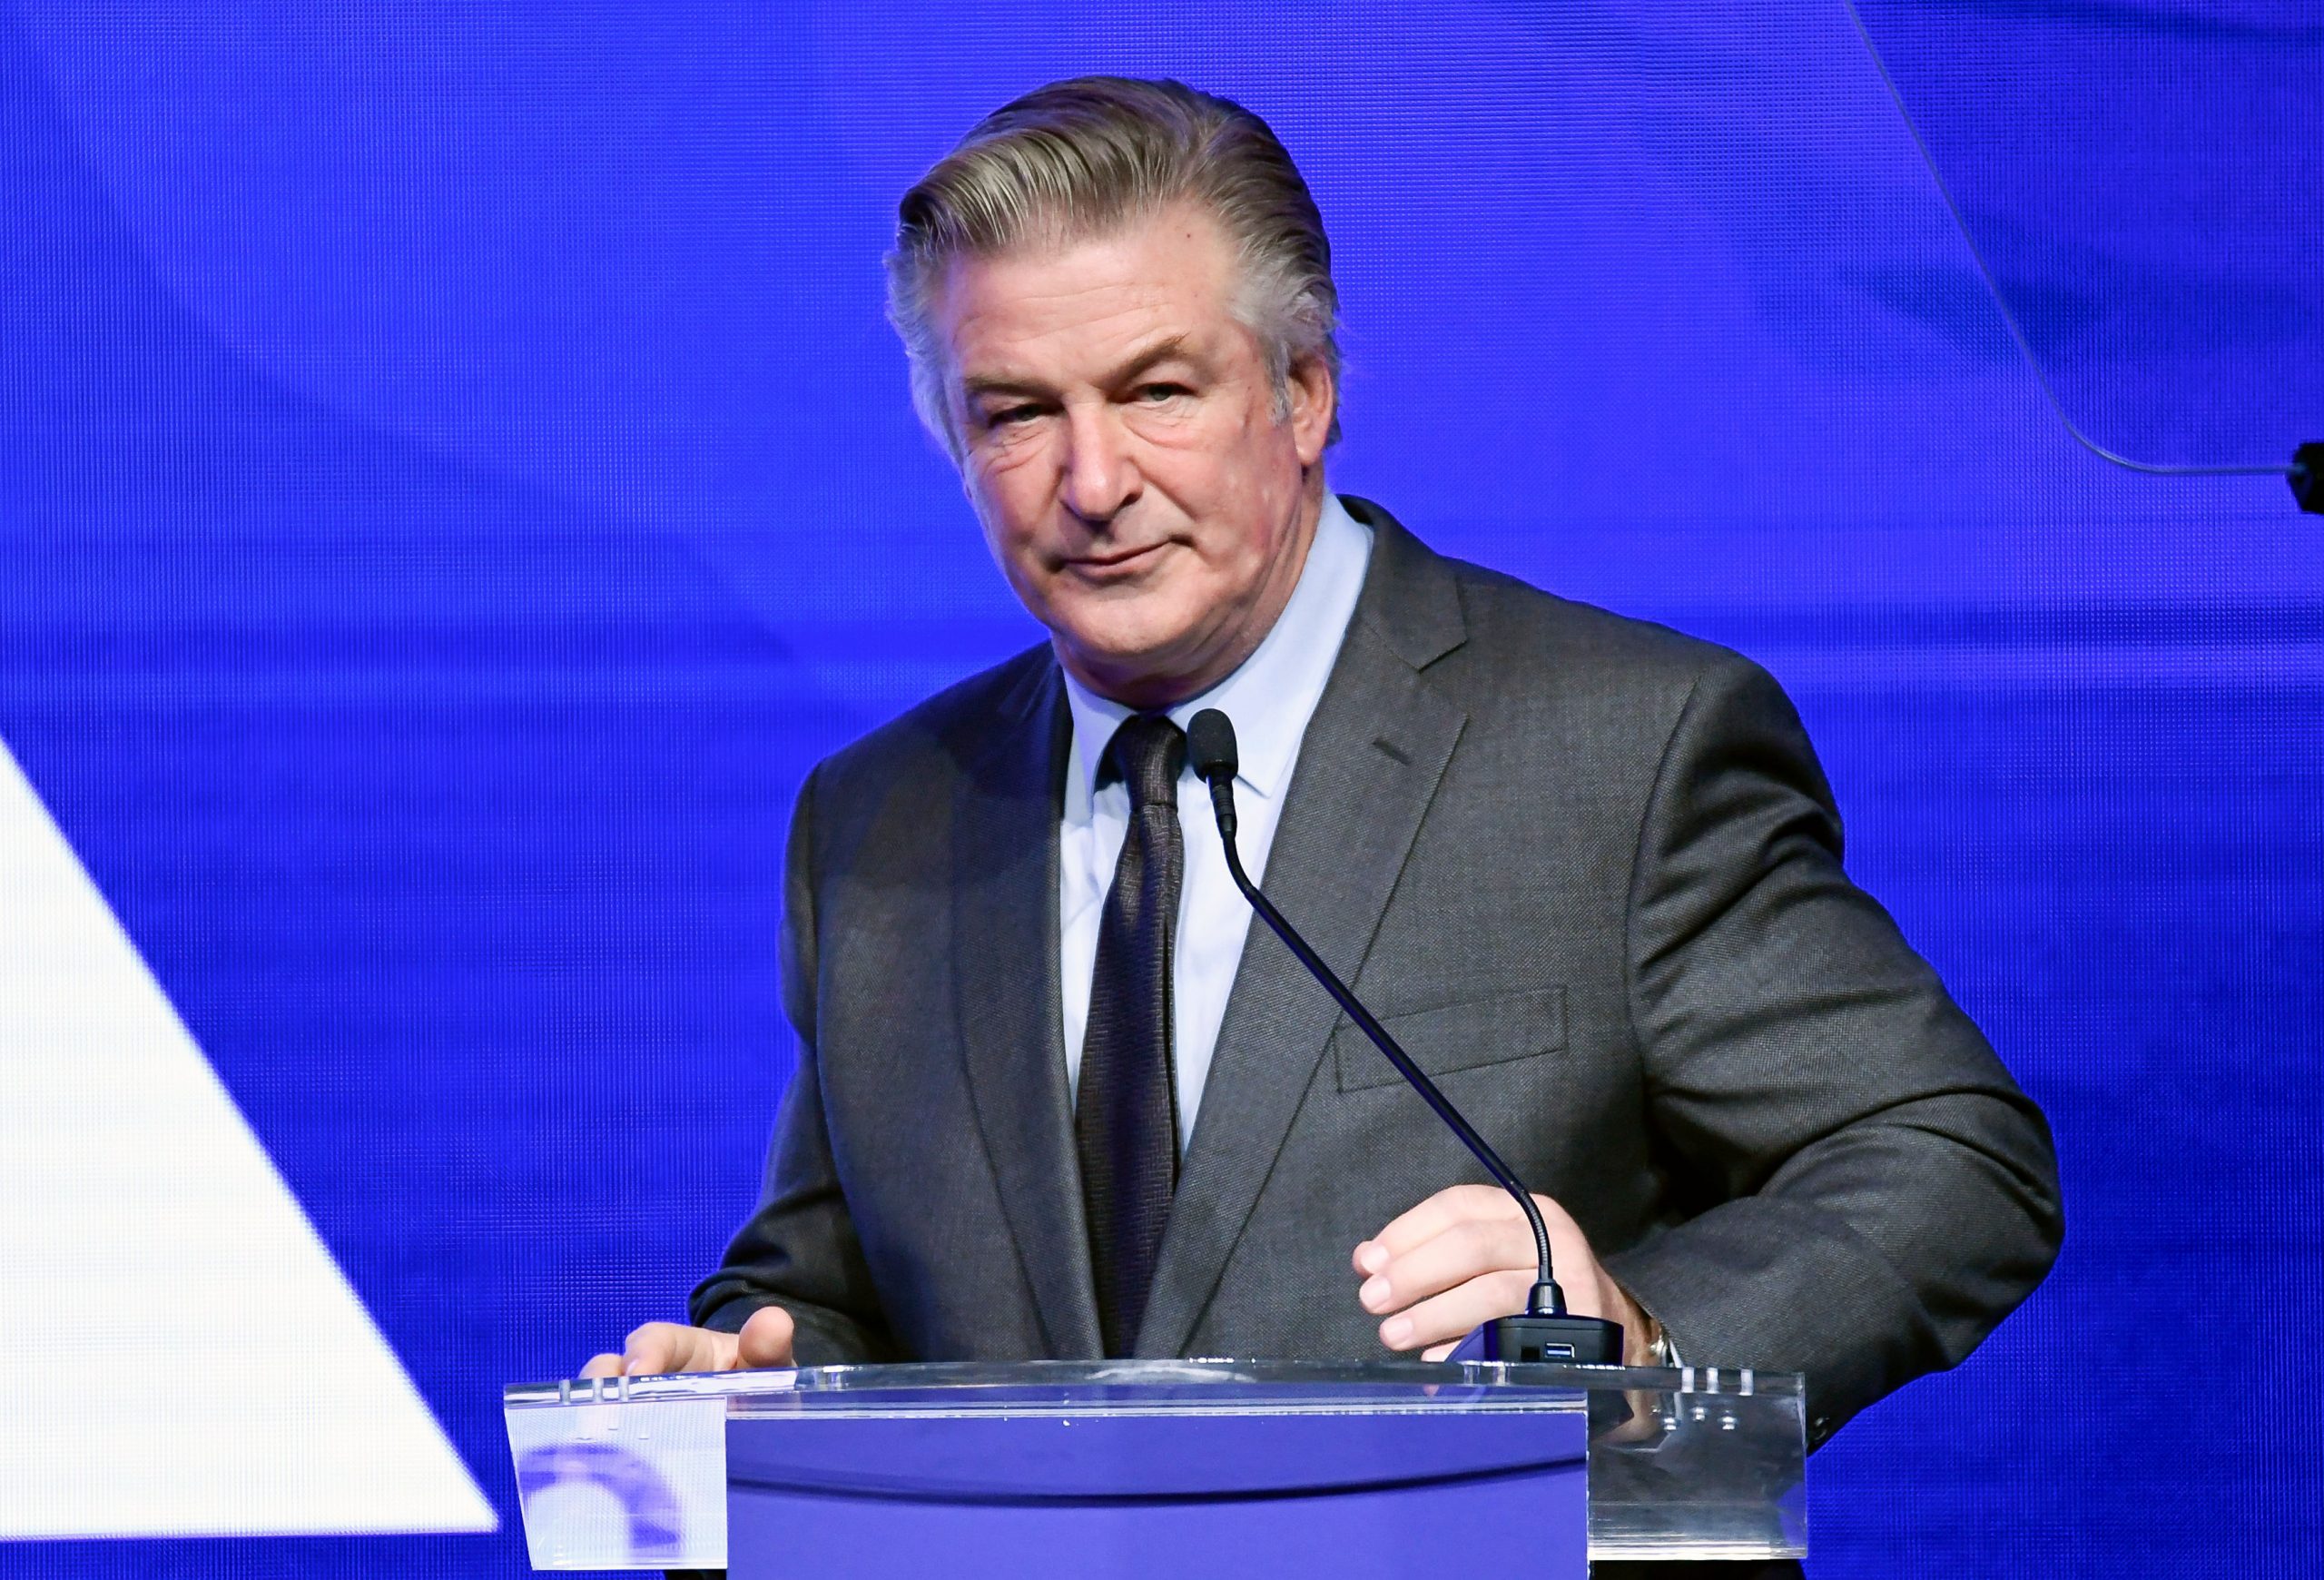 Alec Baldwin sues Rust film crew for Halyna Hutchins death: Here’s why